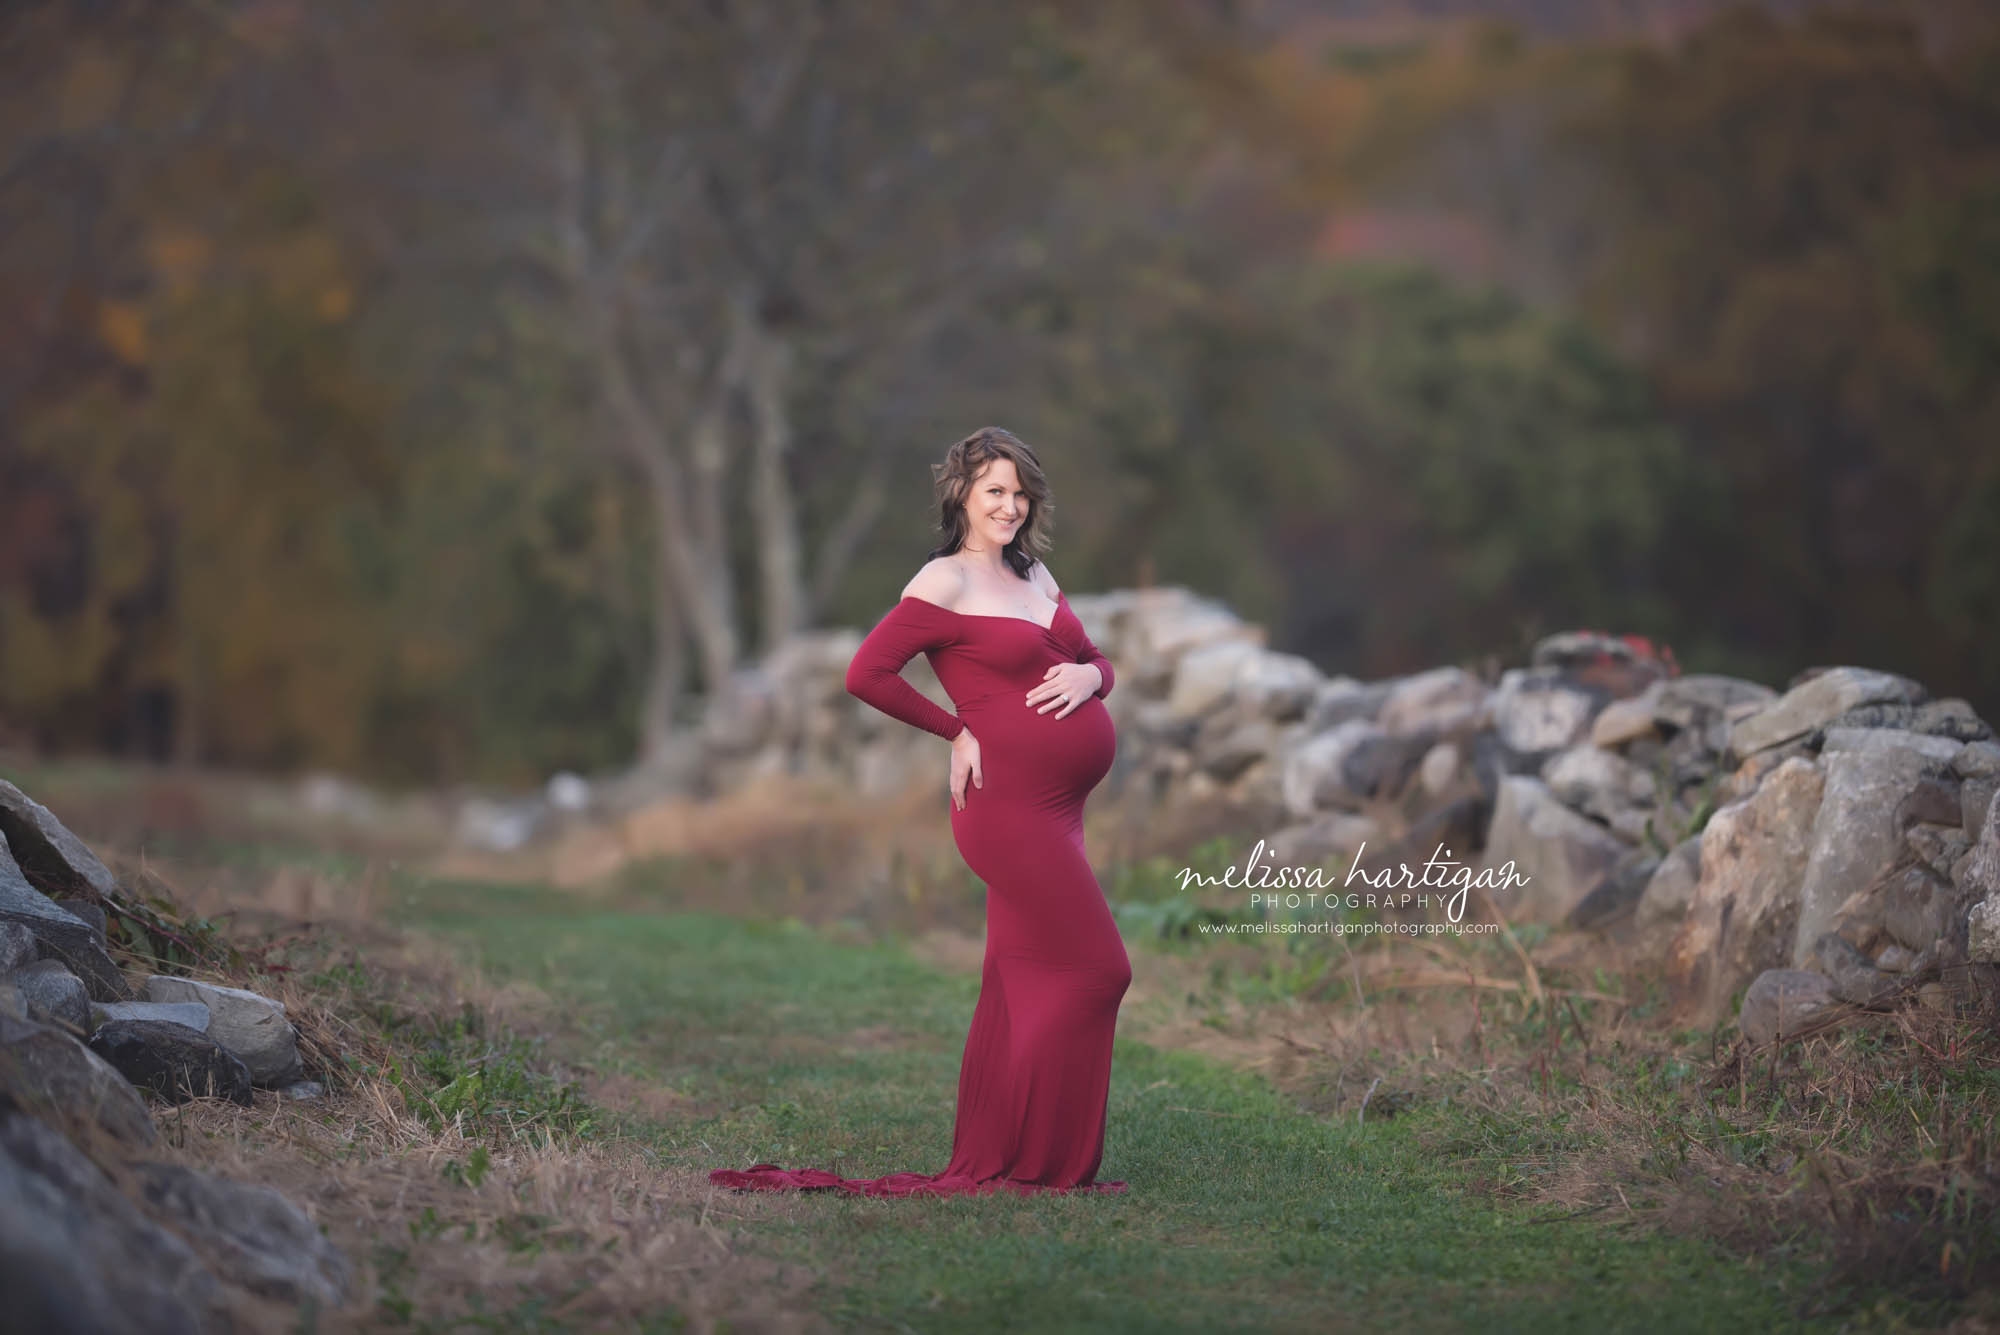 Melissa Hartigan Photography Connecticut Best Maternity Photographer in CT Coventry CT Middlefield CT baby Fairfield county Newborn and maternity CT photographer Maternity photographer Mommy-to-be outdoor session wearing red maternity dress holding belly standing in field by stone wall